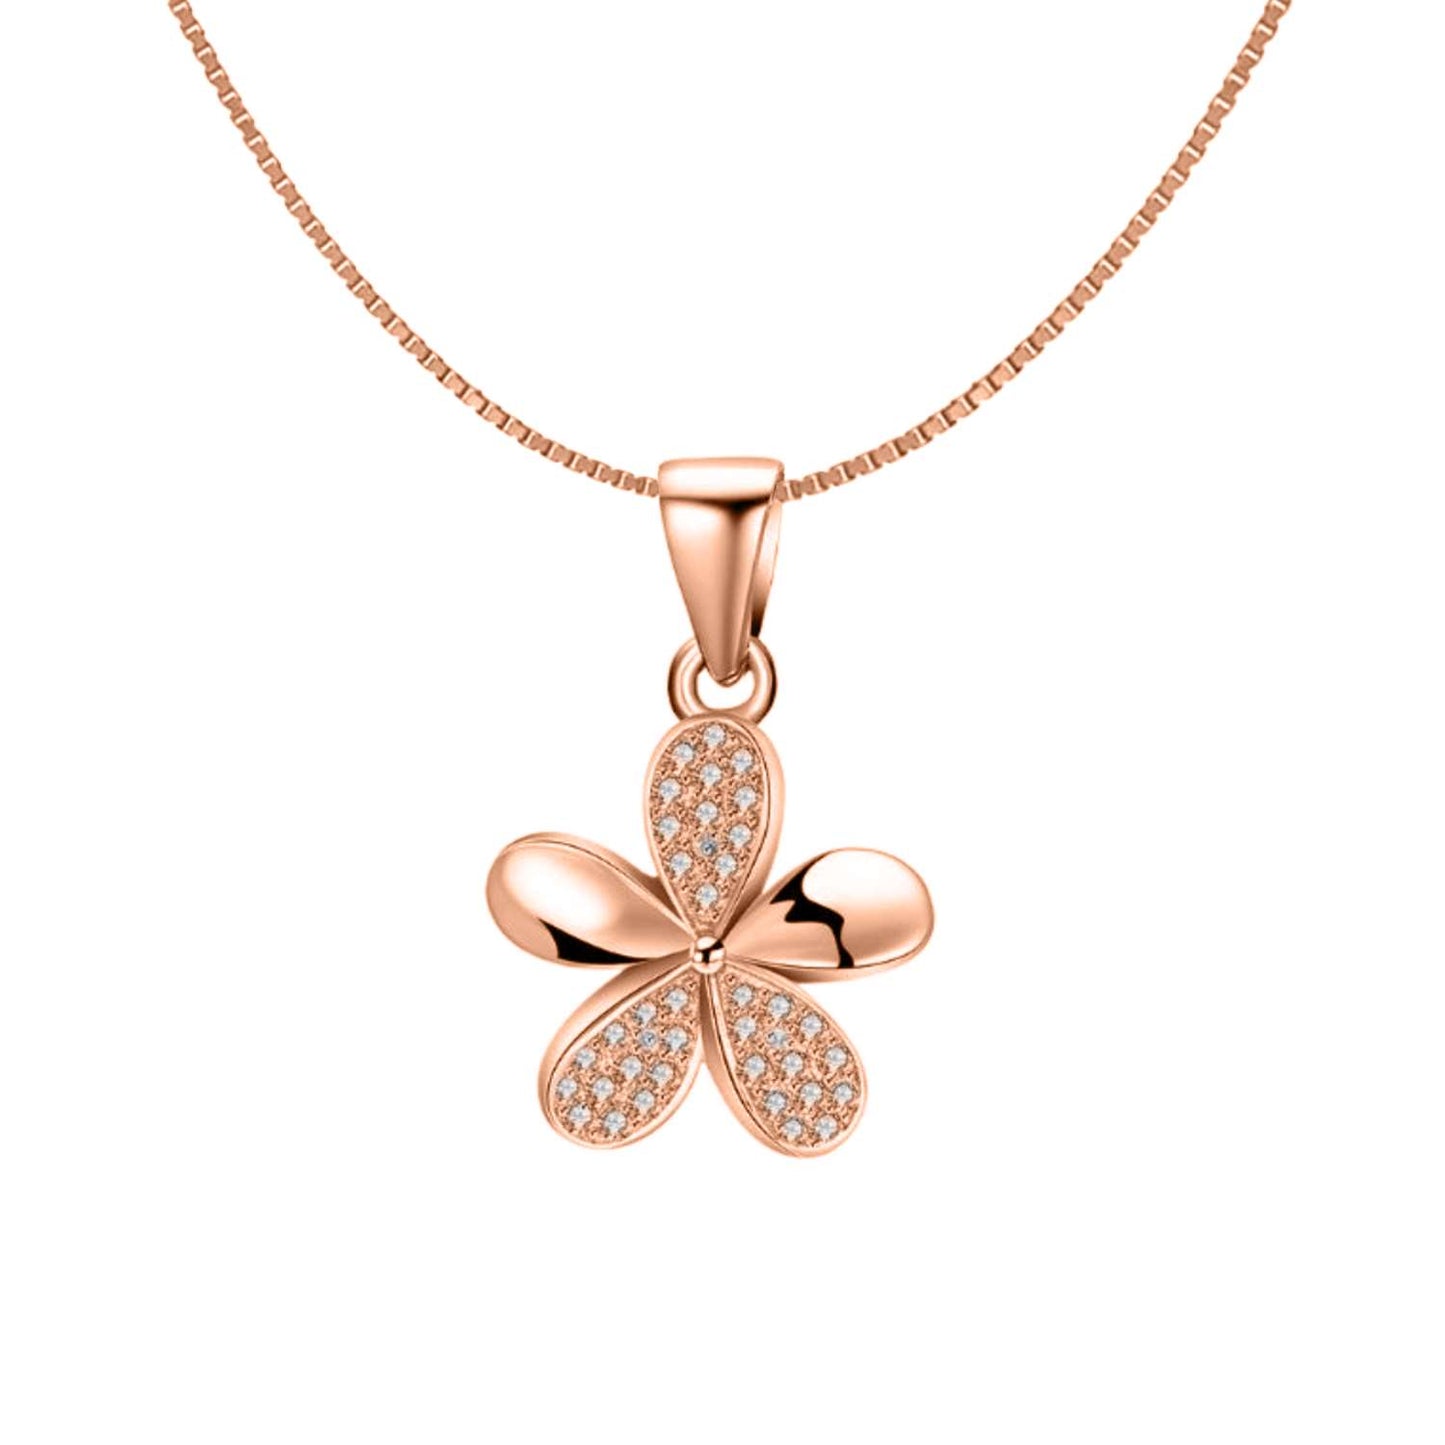 Flower Pendant in 92.5 Sterling Silver - 18k Rose Gold finish, studded with Zirconia